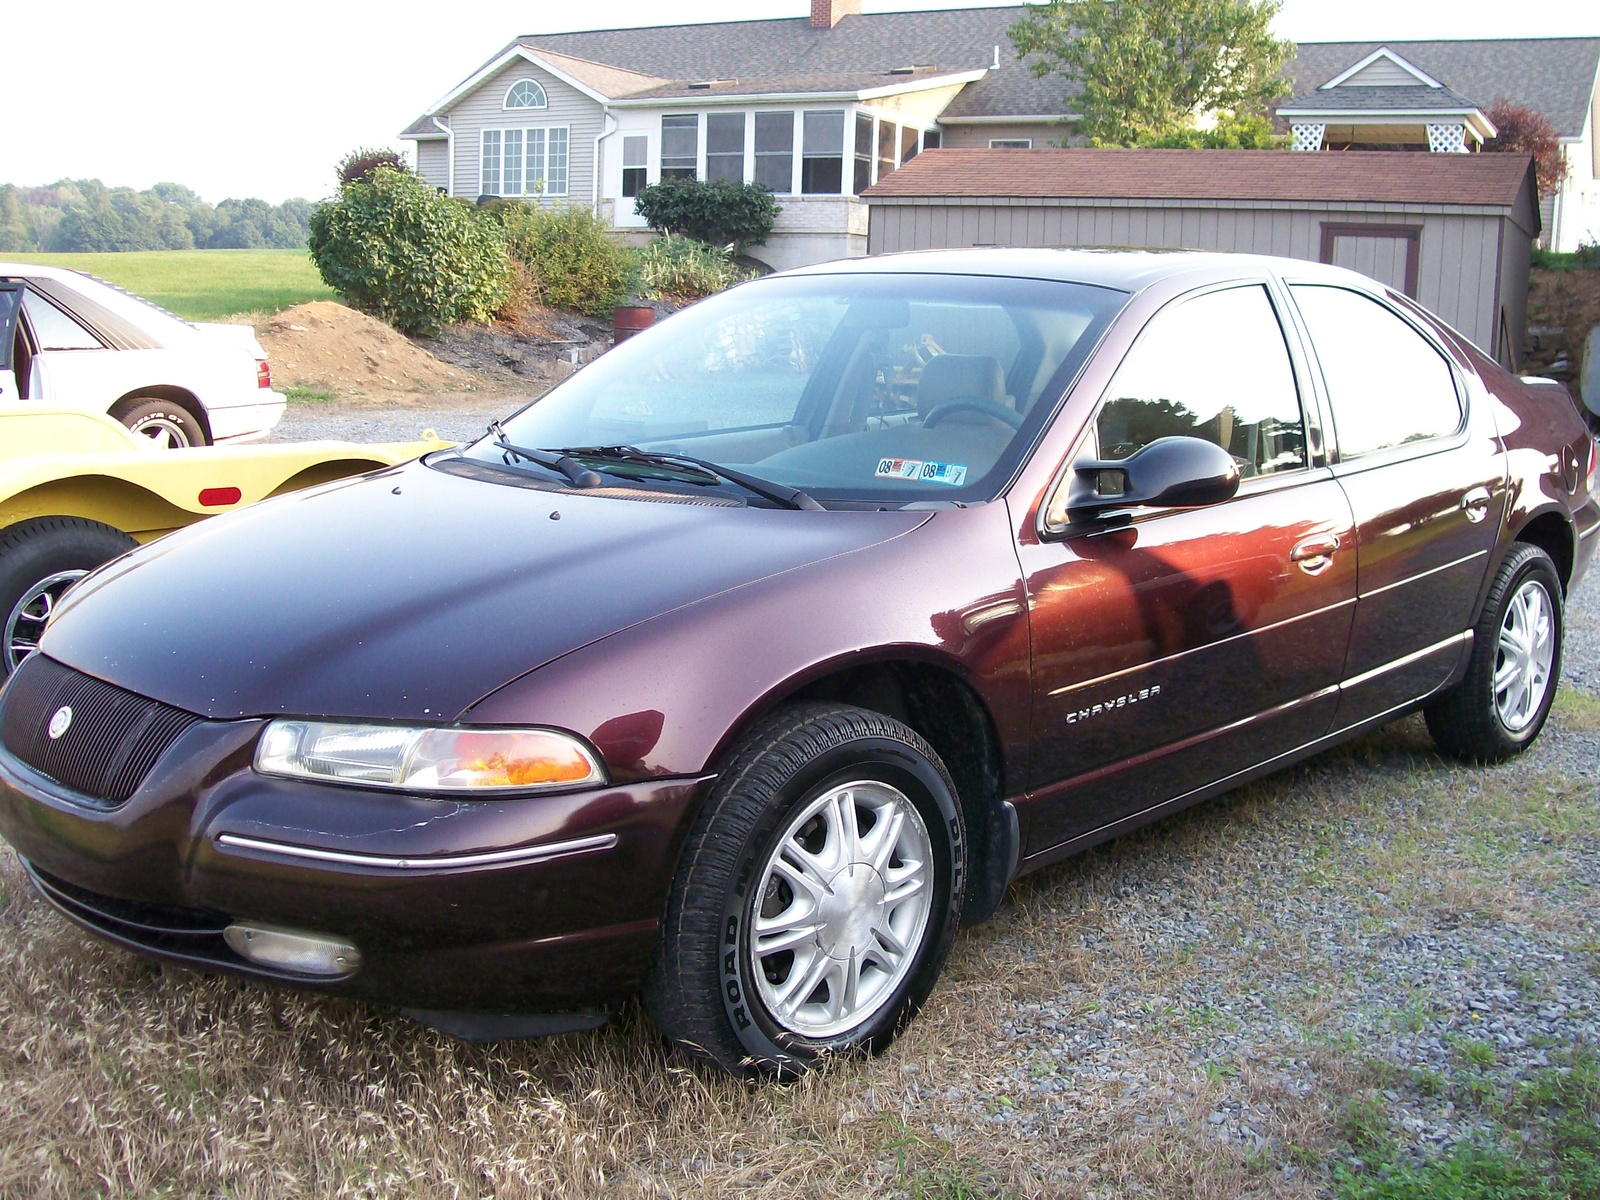 1996 Chrysler town and country lxi specs #2